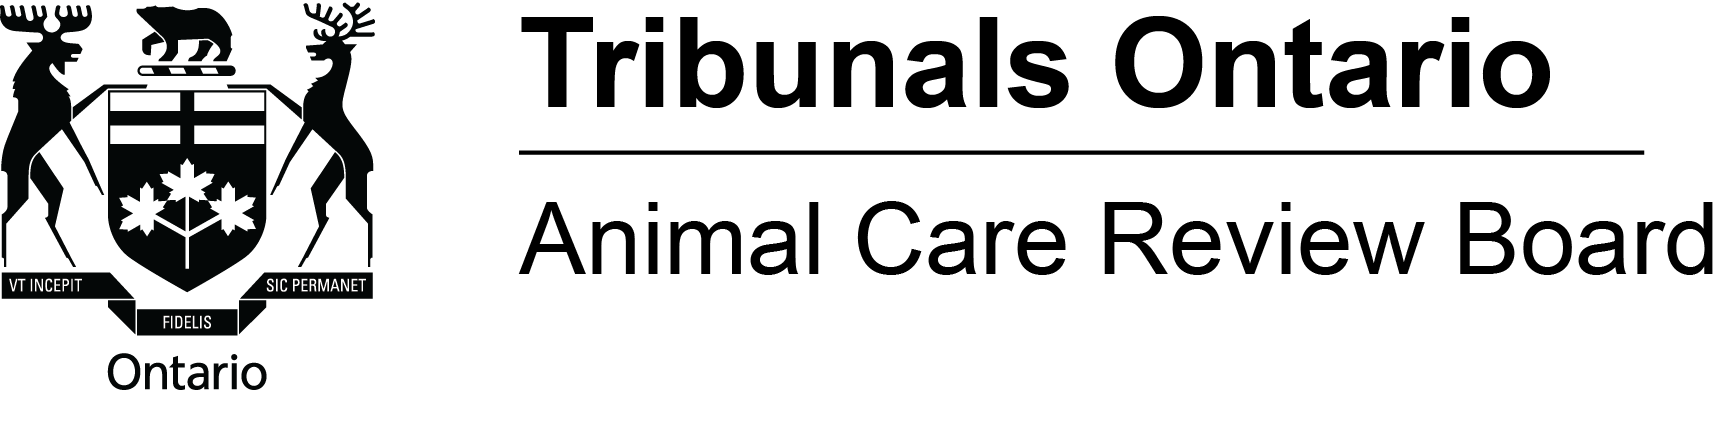 Animal Care Review Board logo